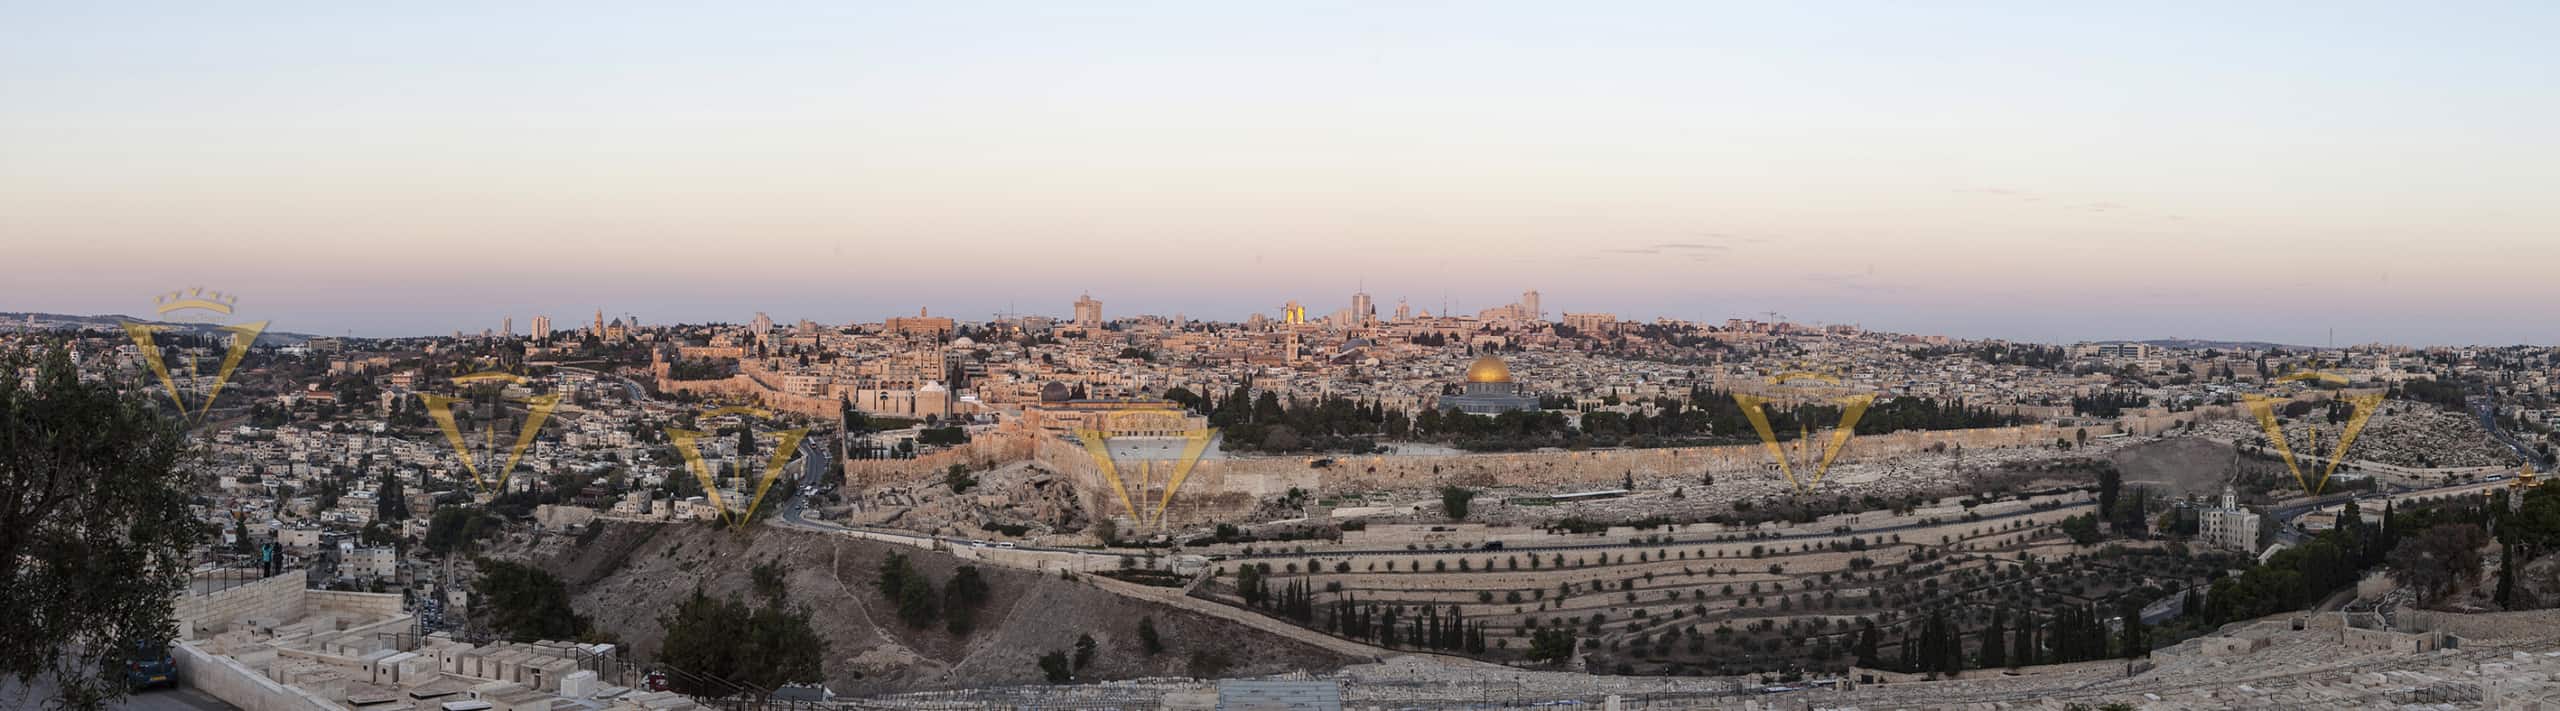 Panoramic of Jerusalem from Mt of Olives by Joe Hani 2018